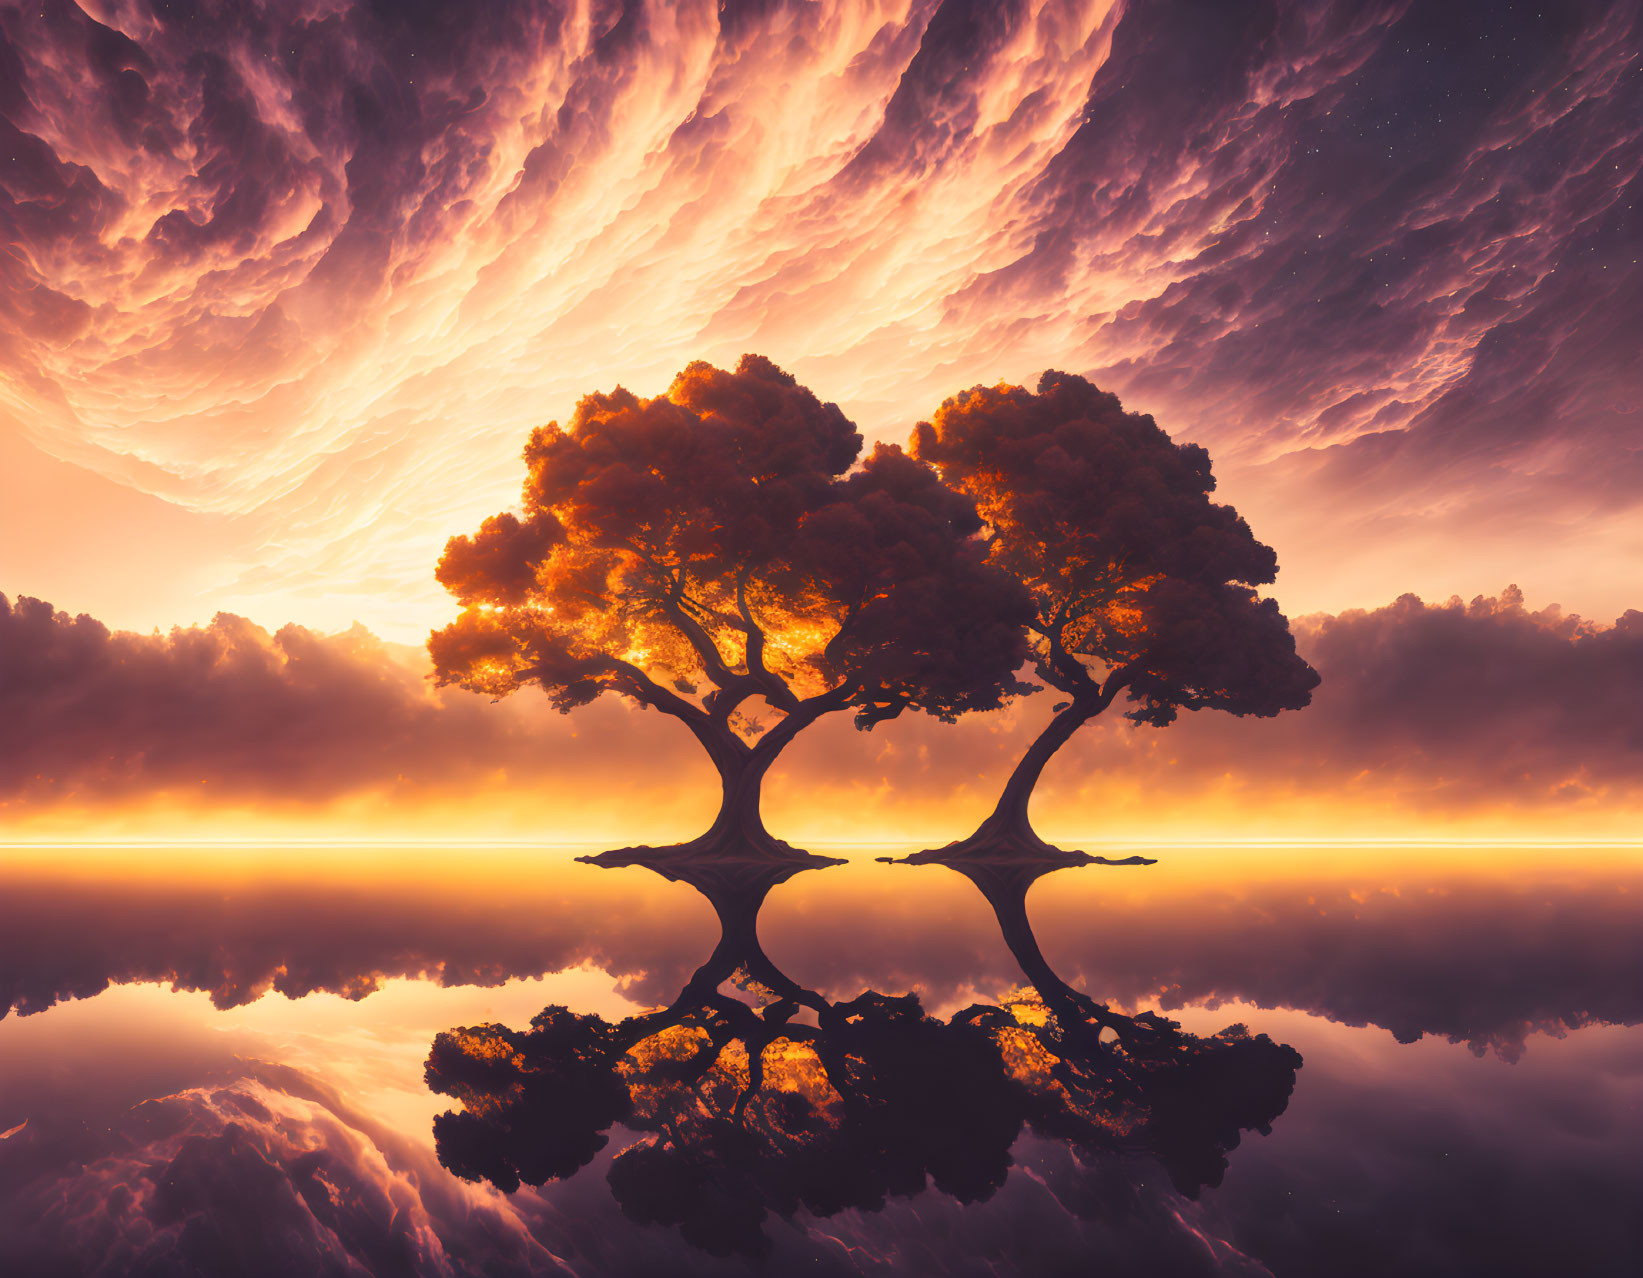 Twin trees in an empty world